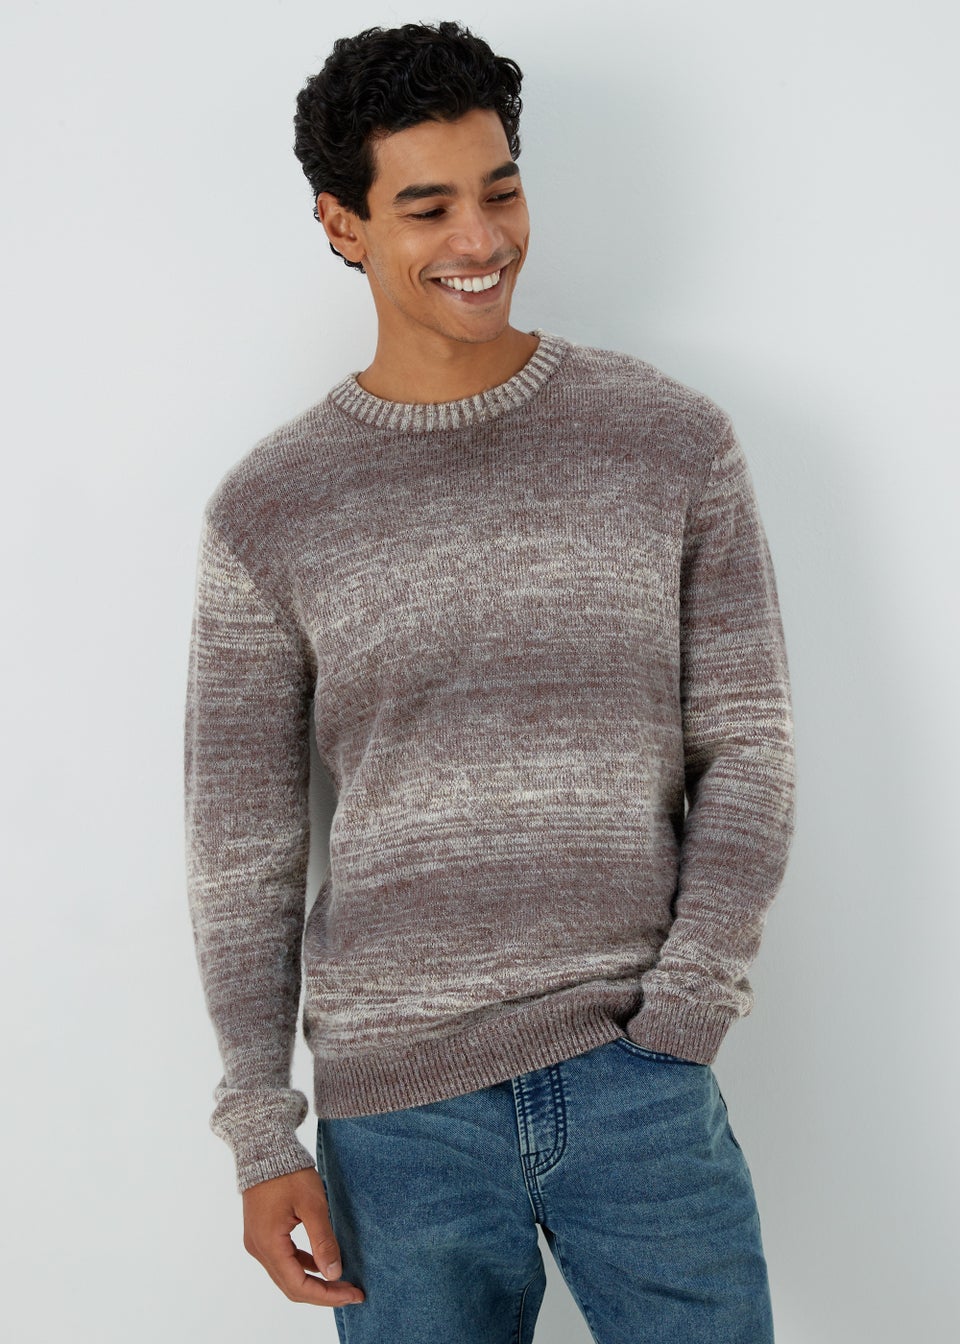 Brown Ombre Jumper